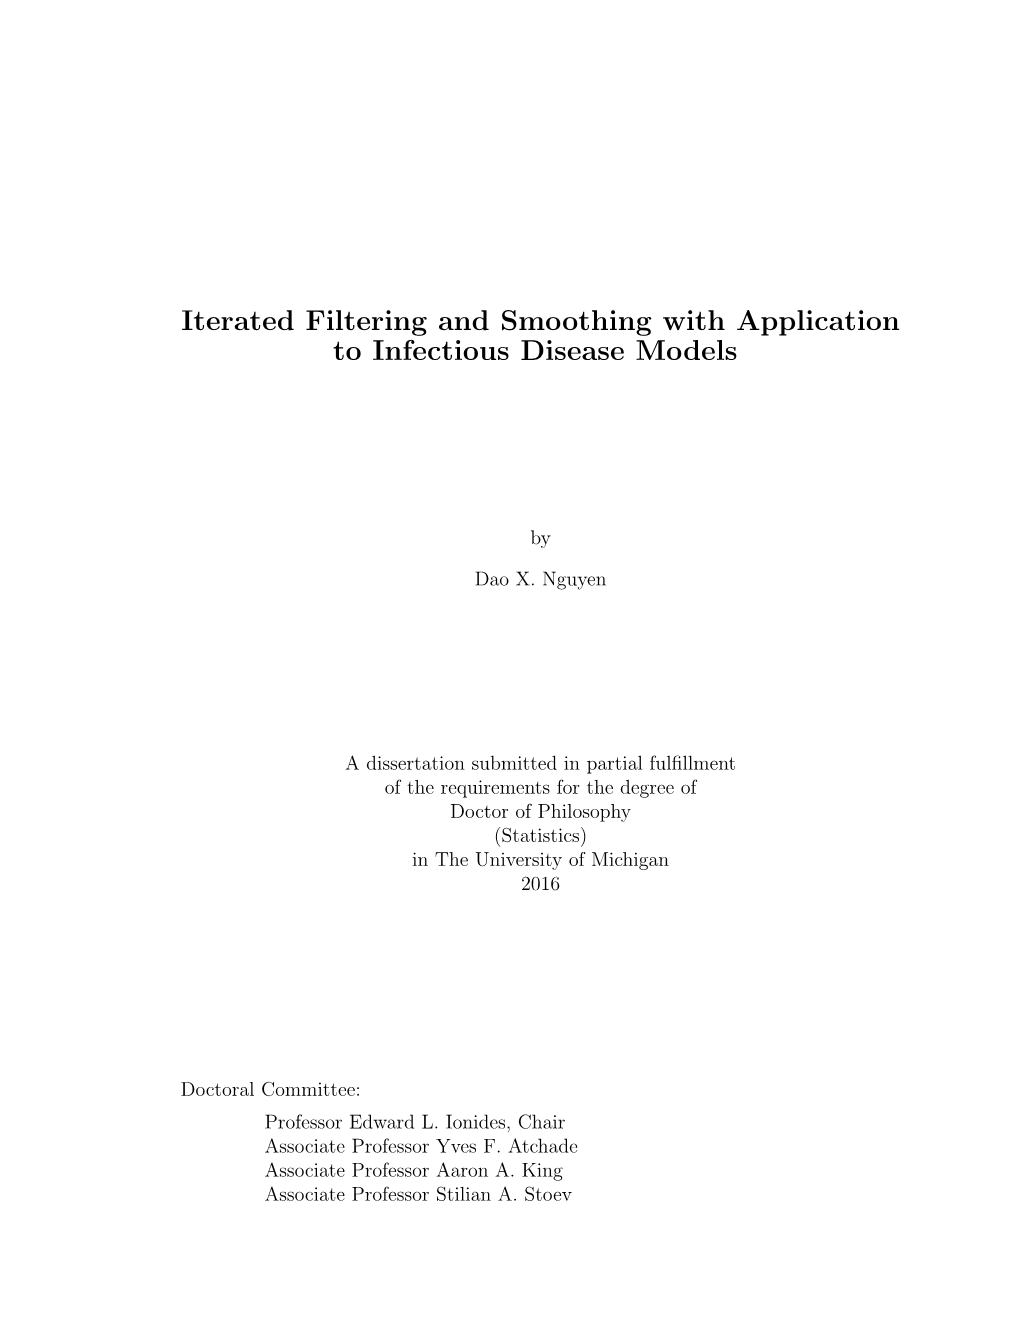 Iterated Filtering and Smoothing with Application to Infectious Disease Models